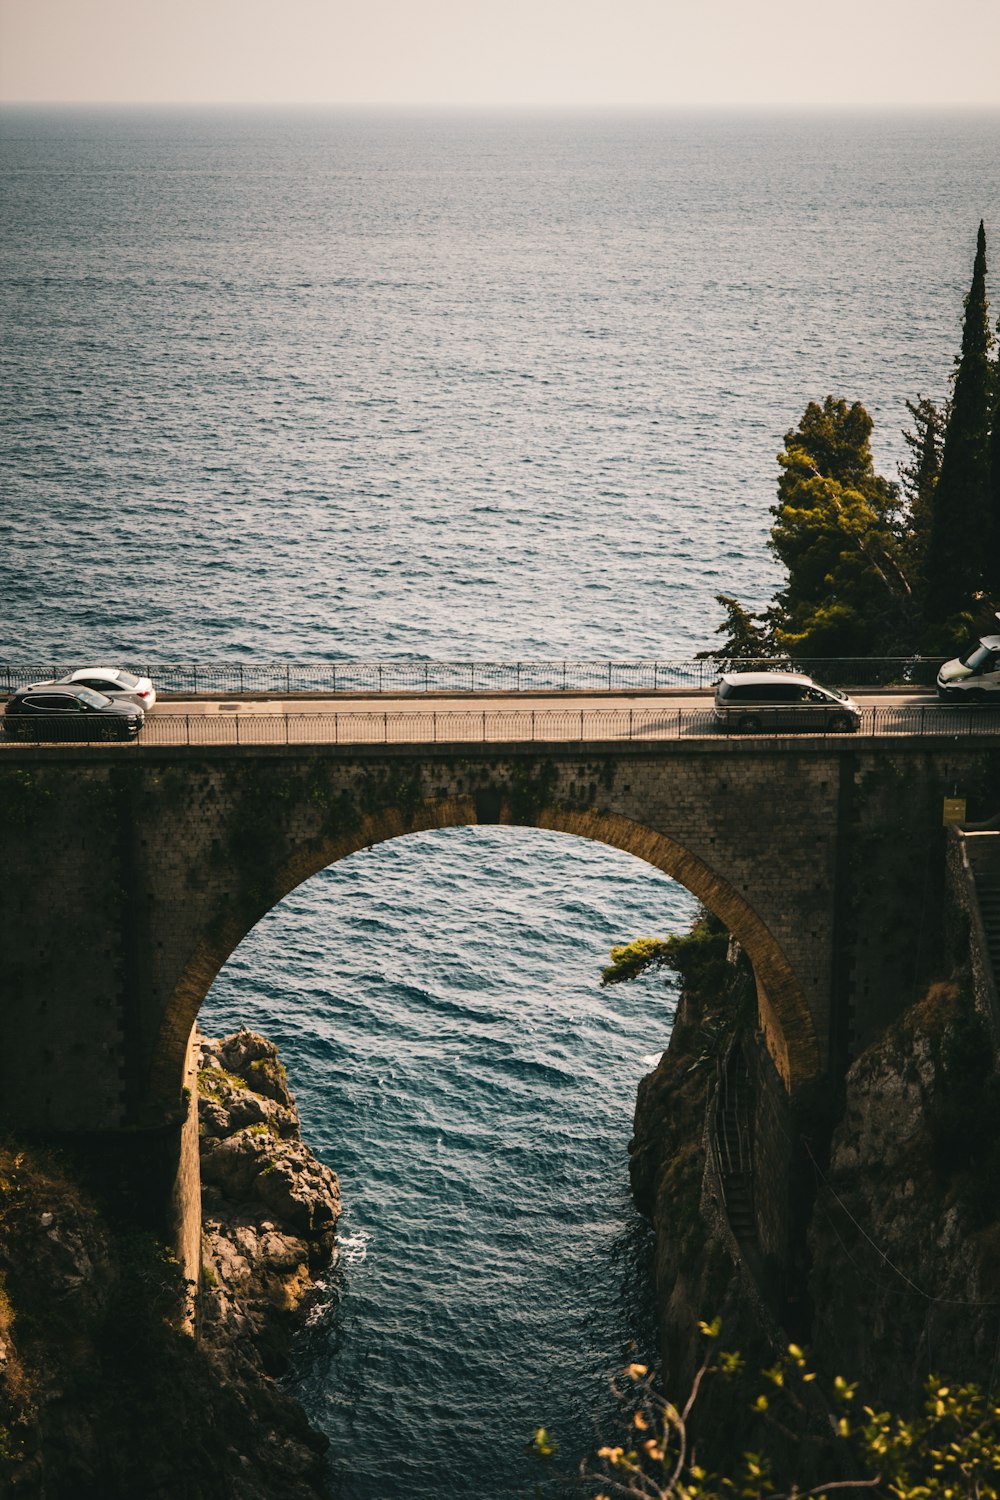 a bridge over a body of water with cars on it